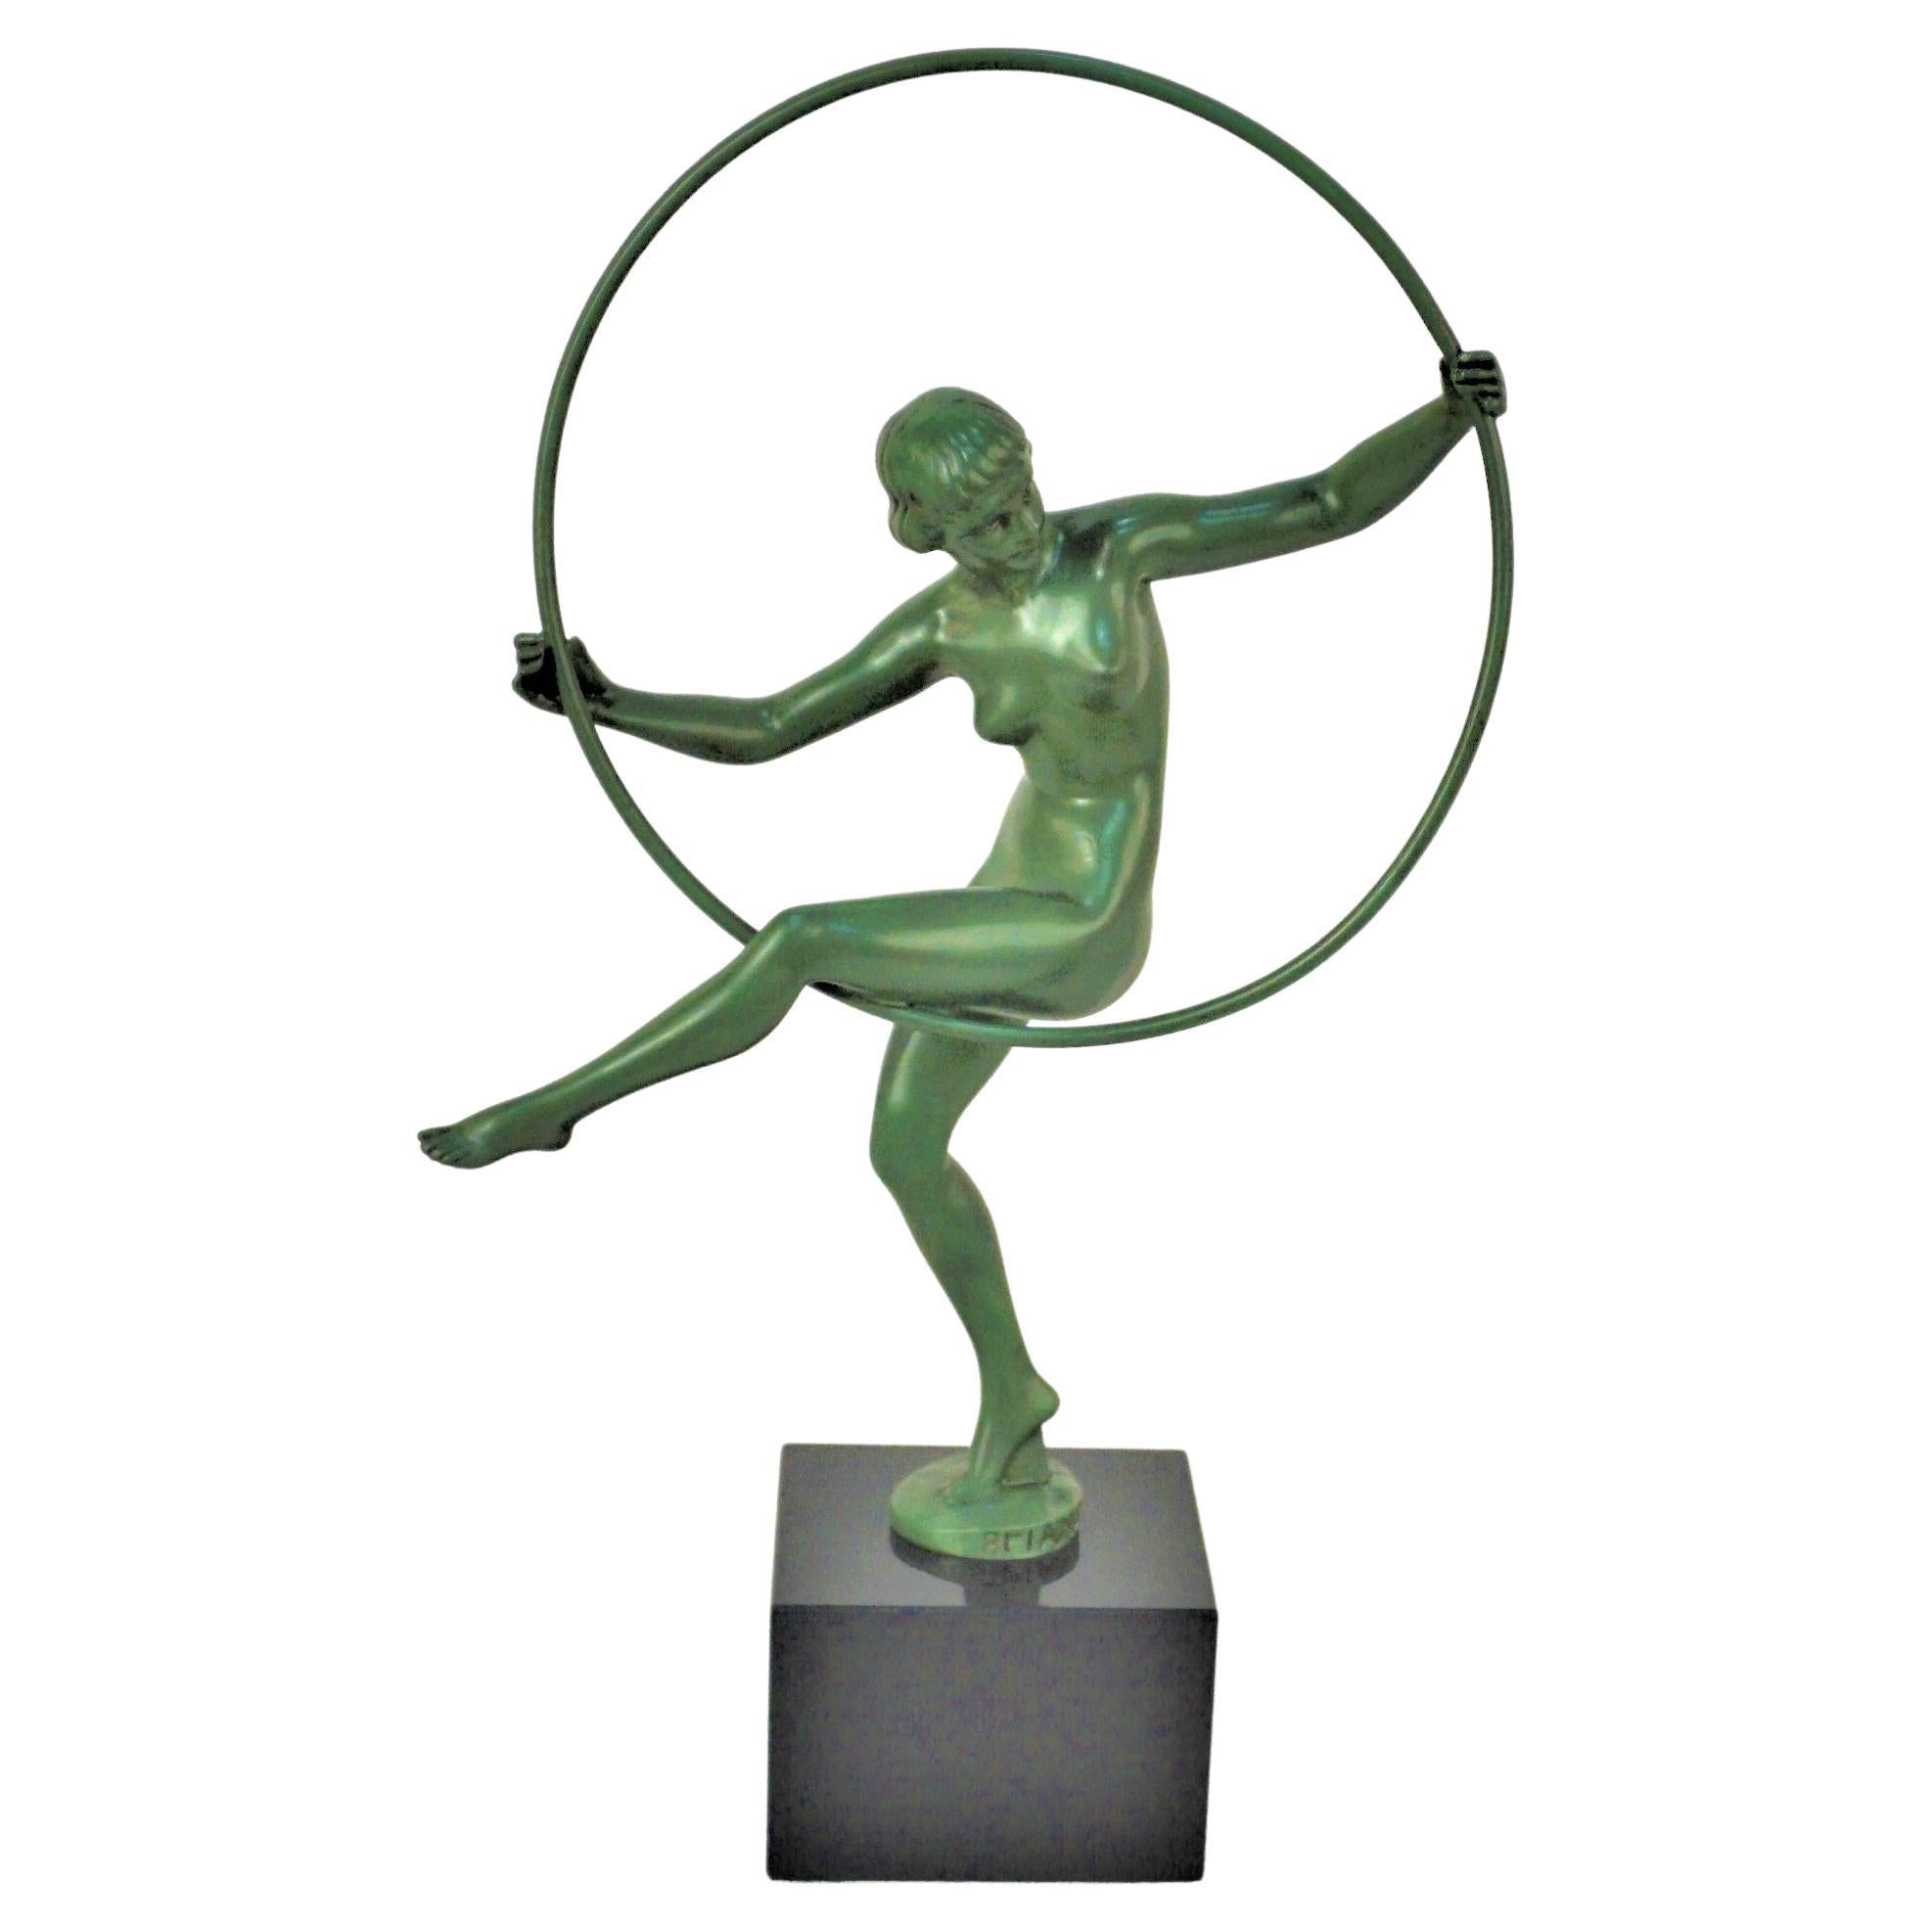 French 1930's Art Deco Sculpture Hoop Dancer Briand, Marcel Andre Bouraine